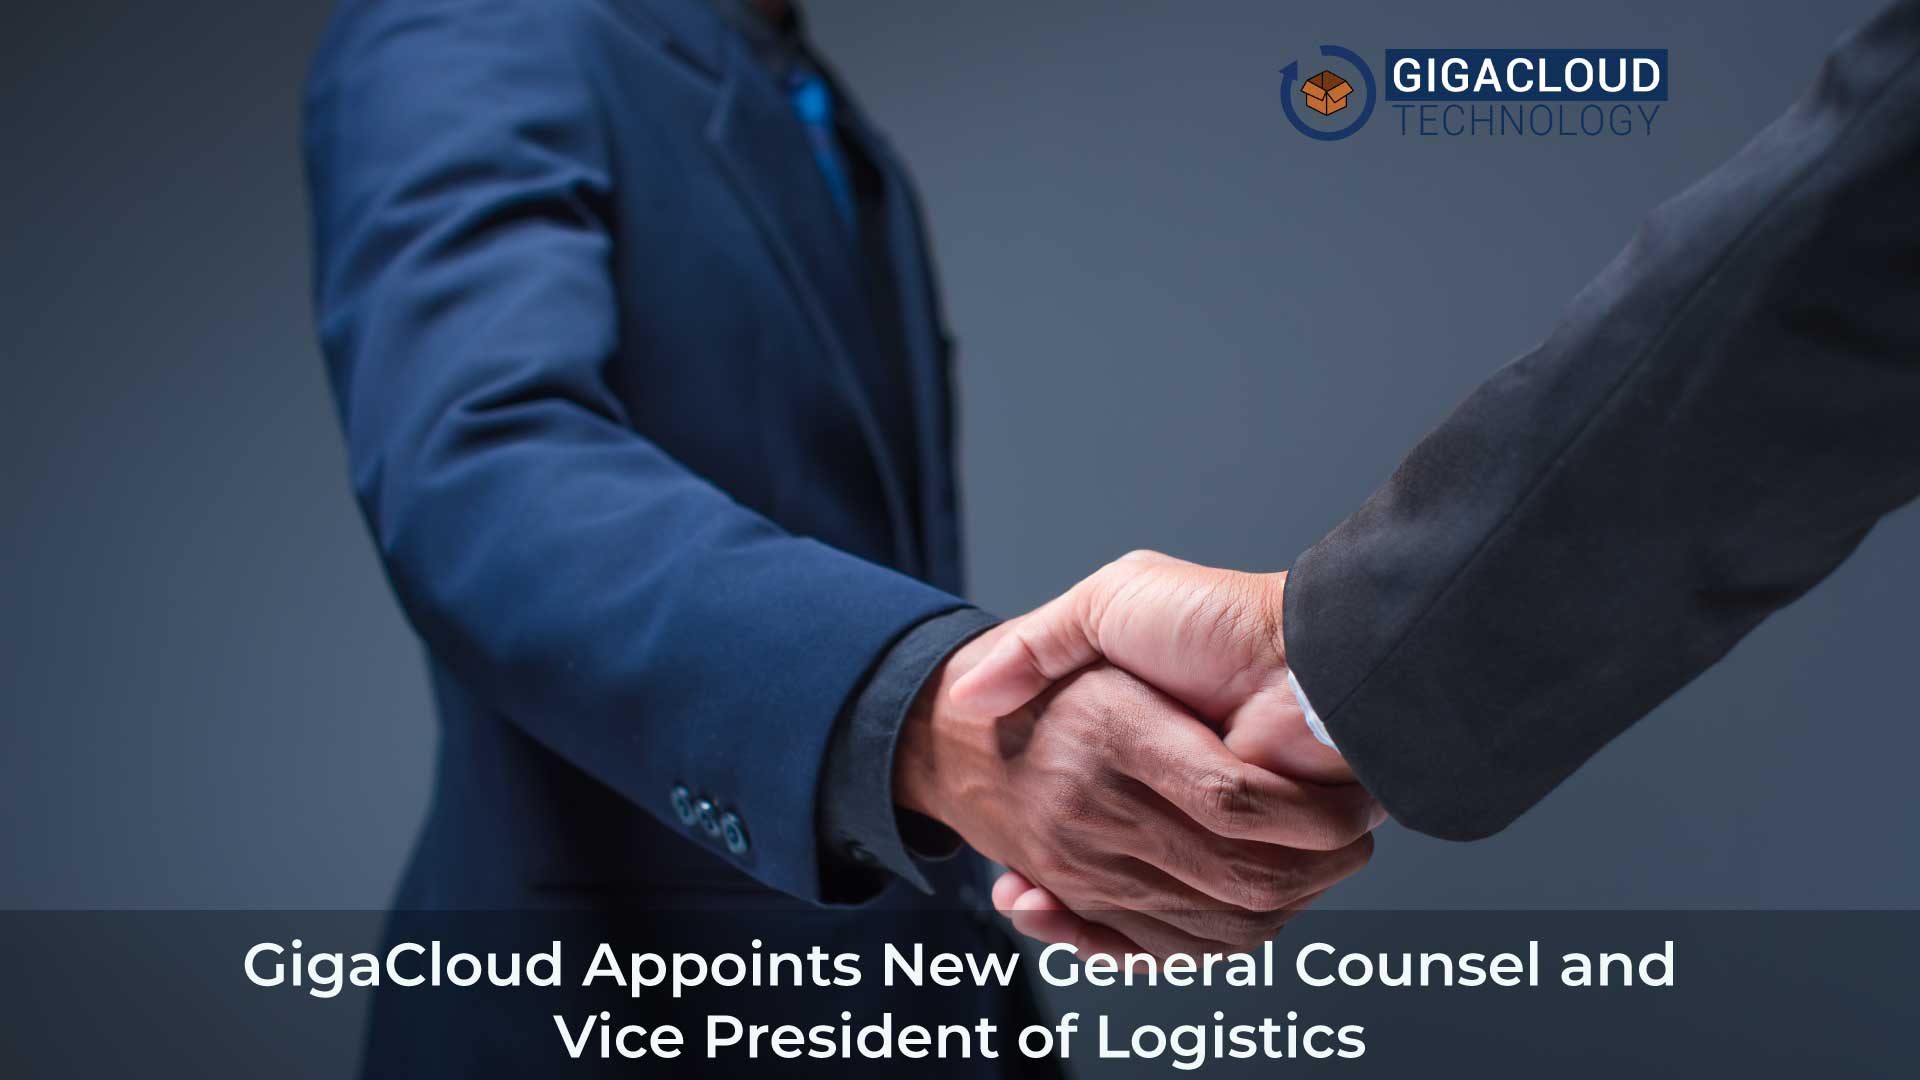 GigaCloud Appoints New General Counsel and Vice President of Logistics